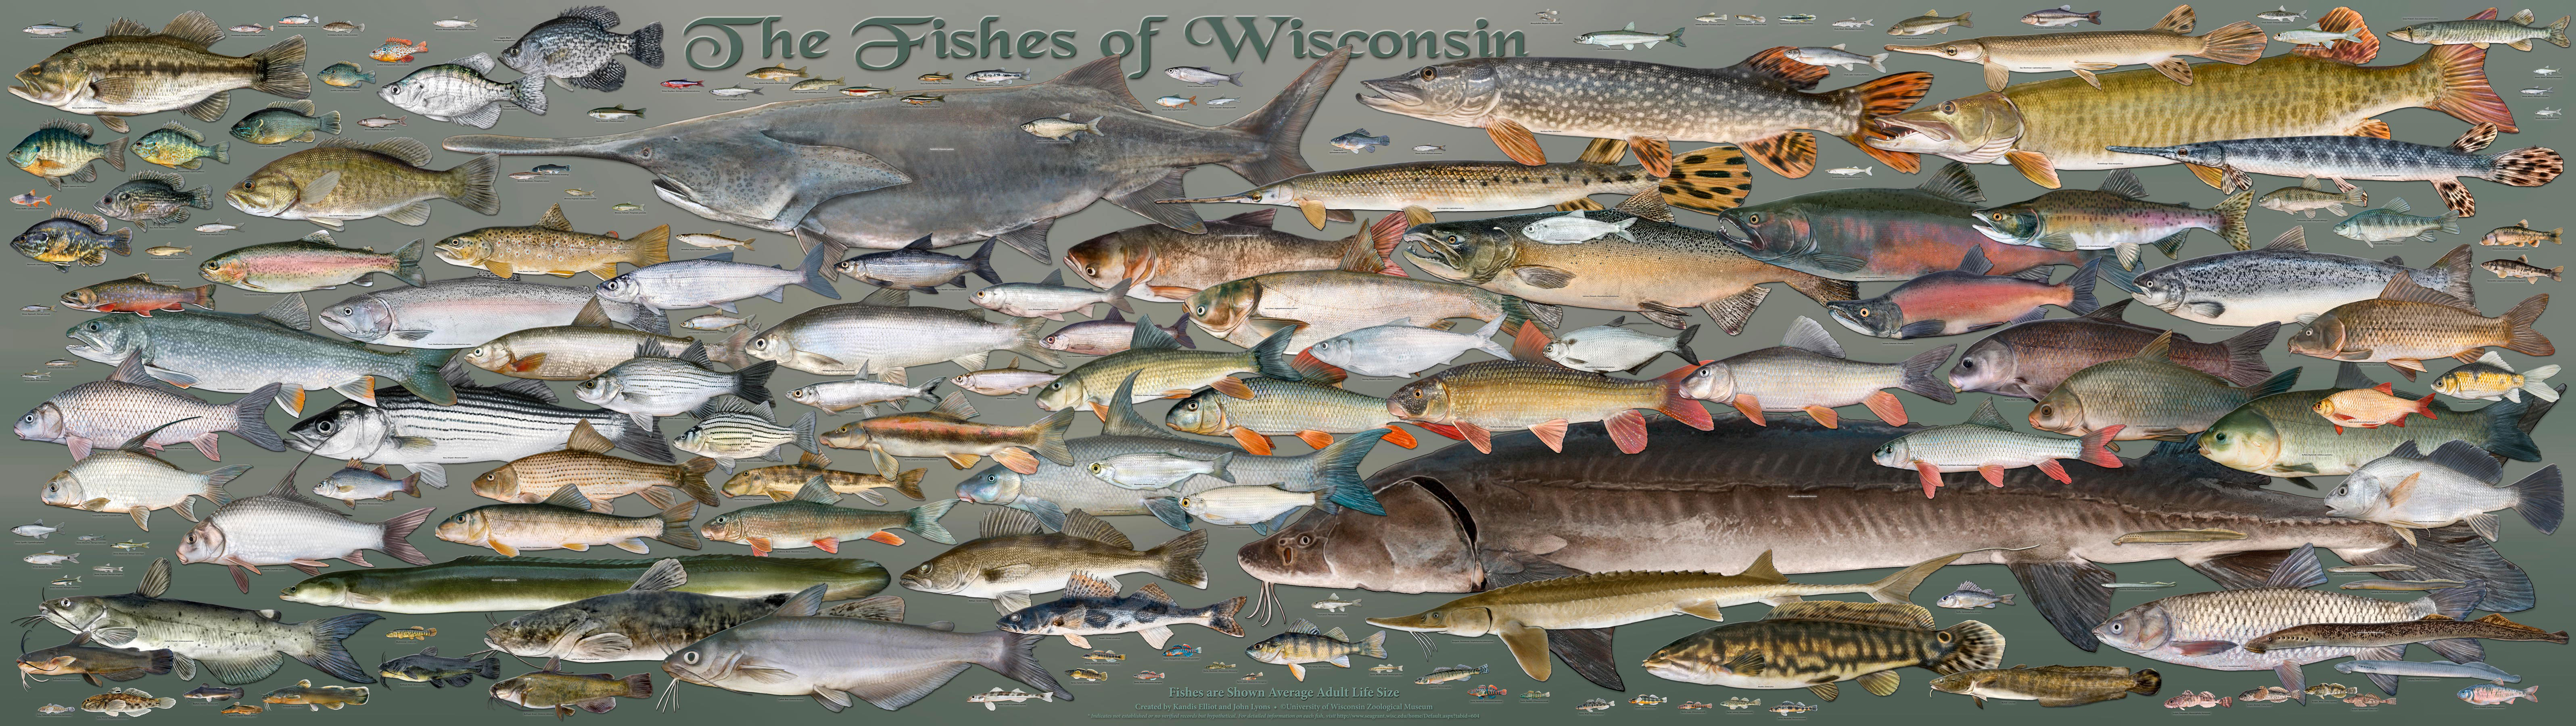 New Fishes of Wisconsin Poster